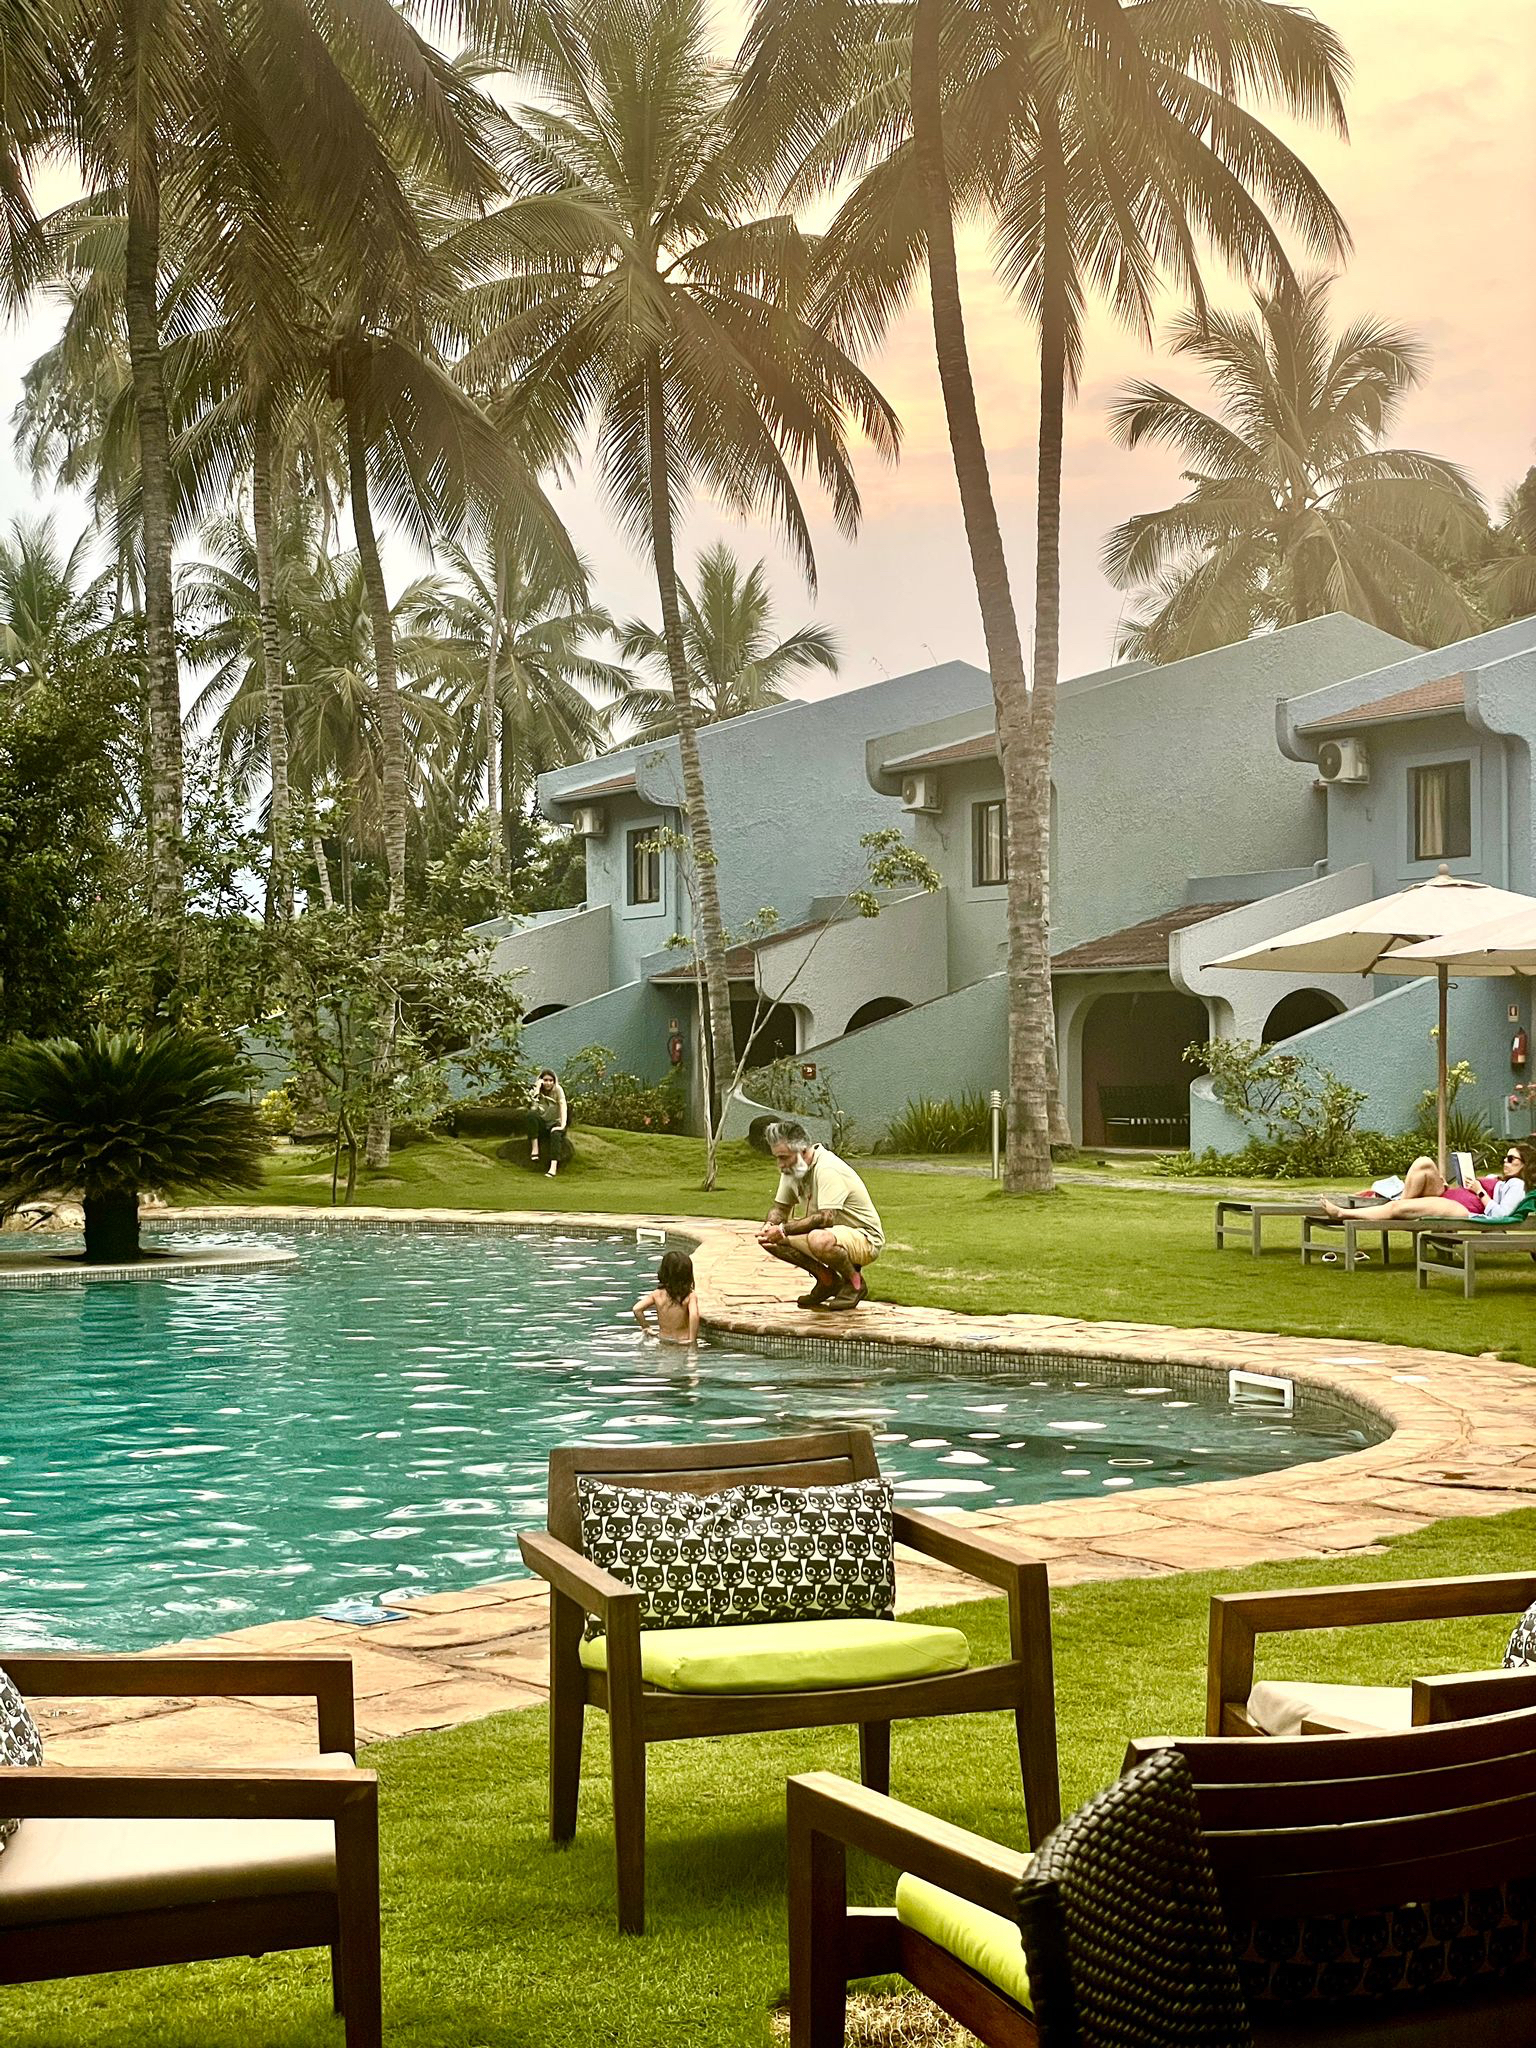 A swimming pool, with a toddler in it, talking to her father, who’s standing outside. There are chairs in the foreground, and palm trees all around. 